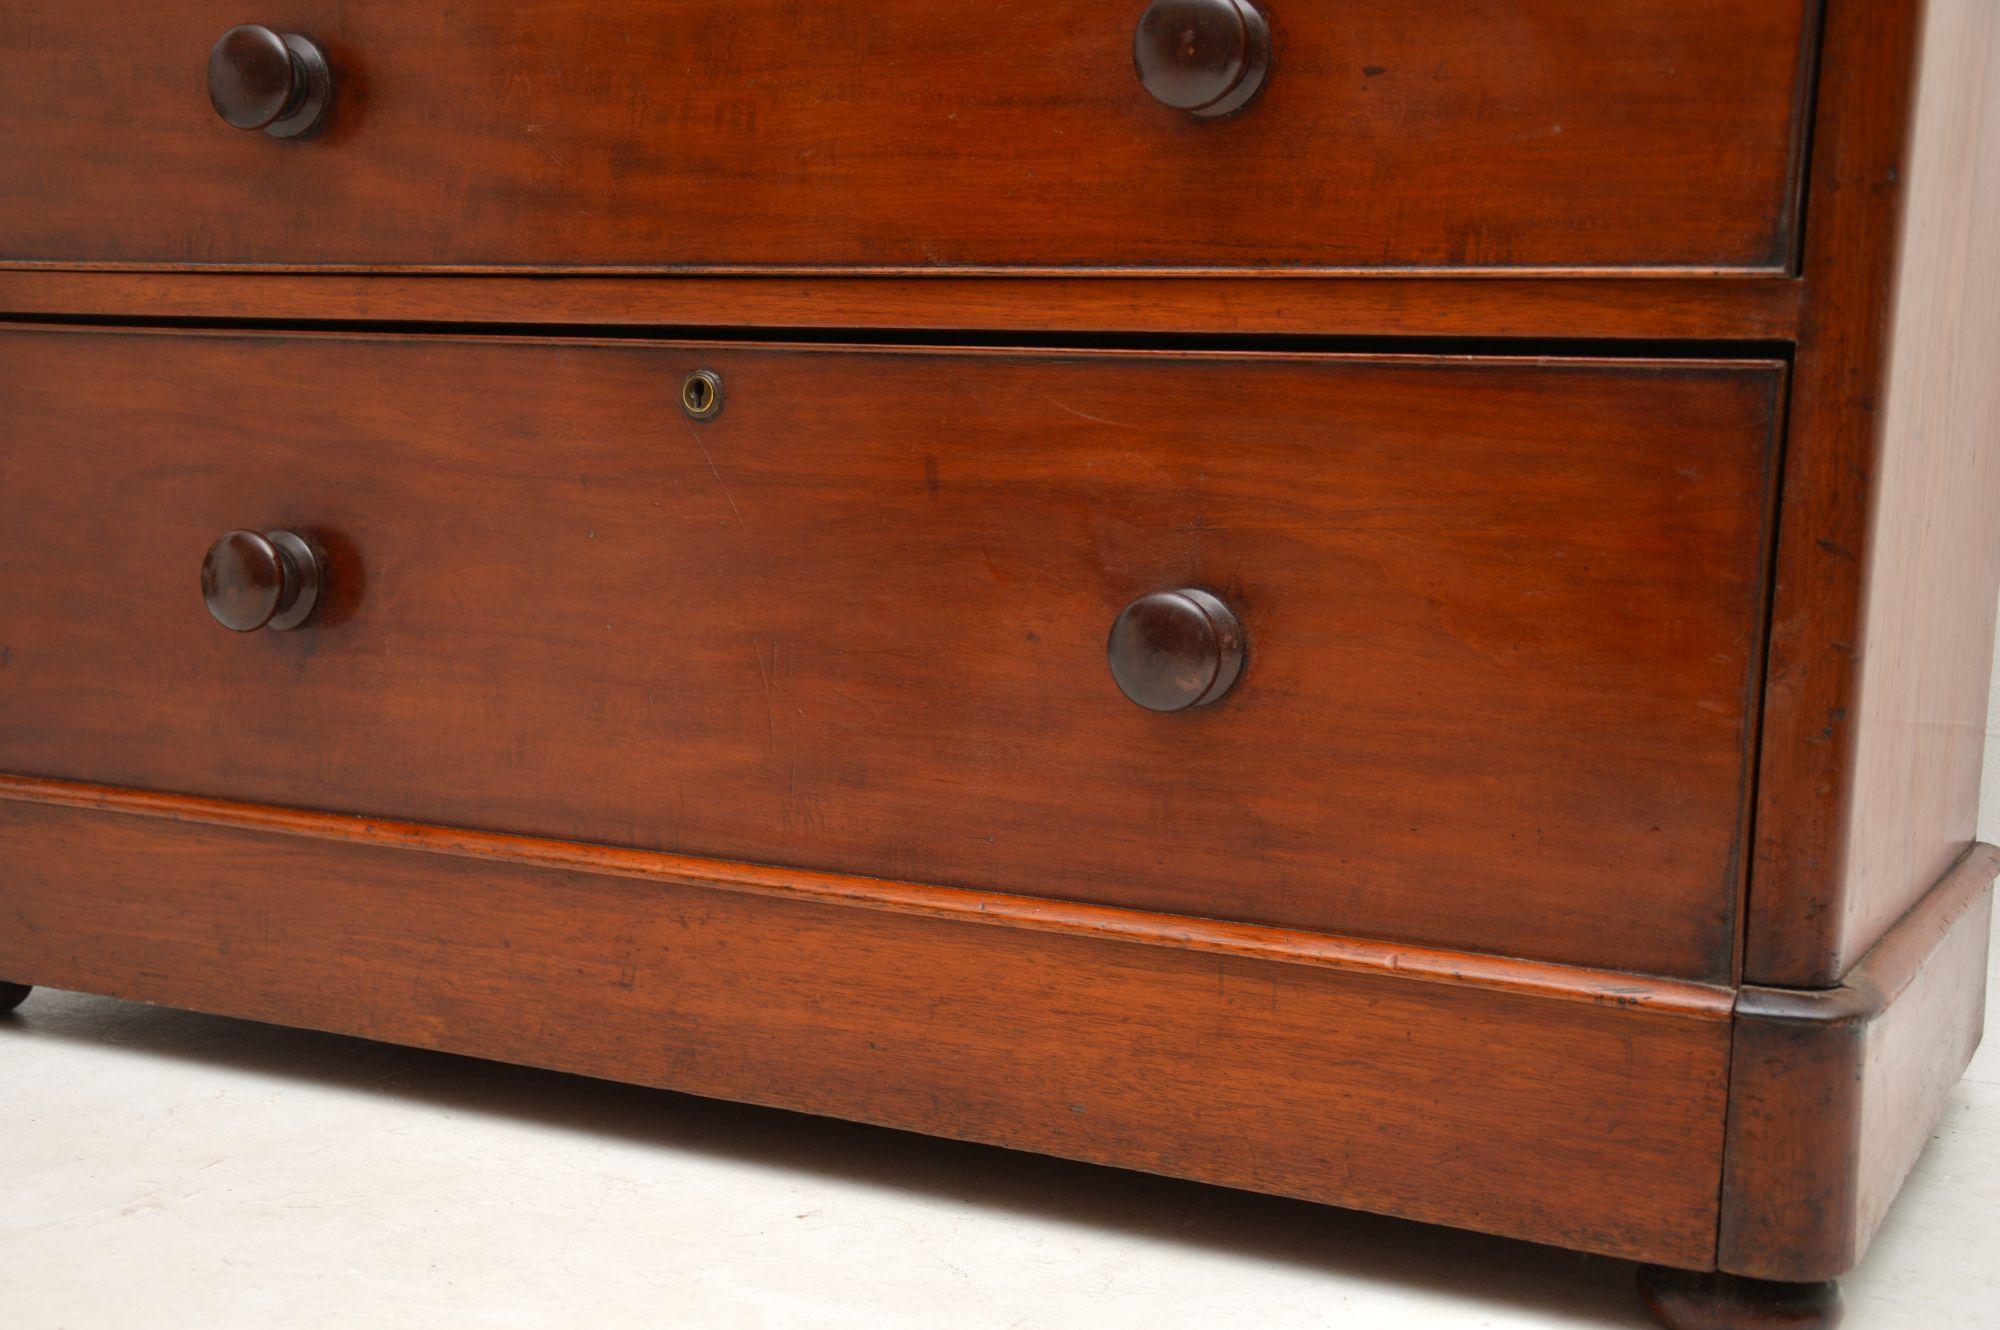 Antique Victorian Mahogany Chest of Drawers 3